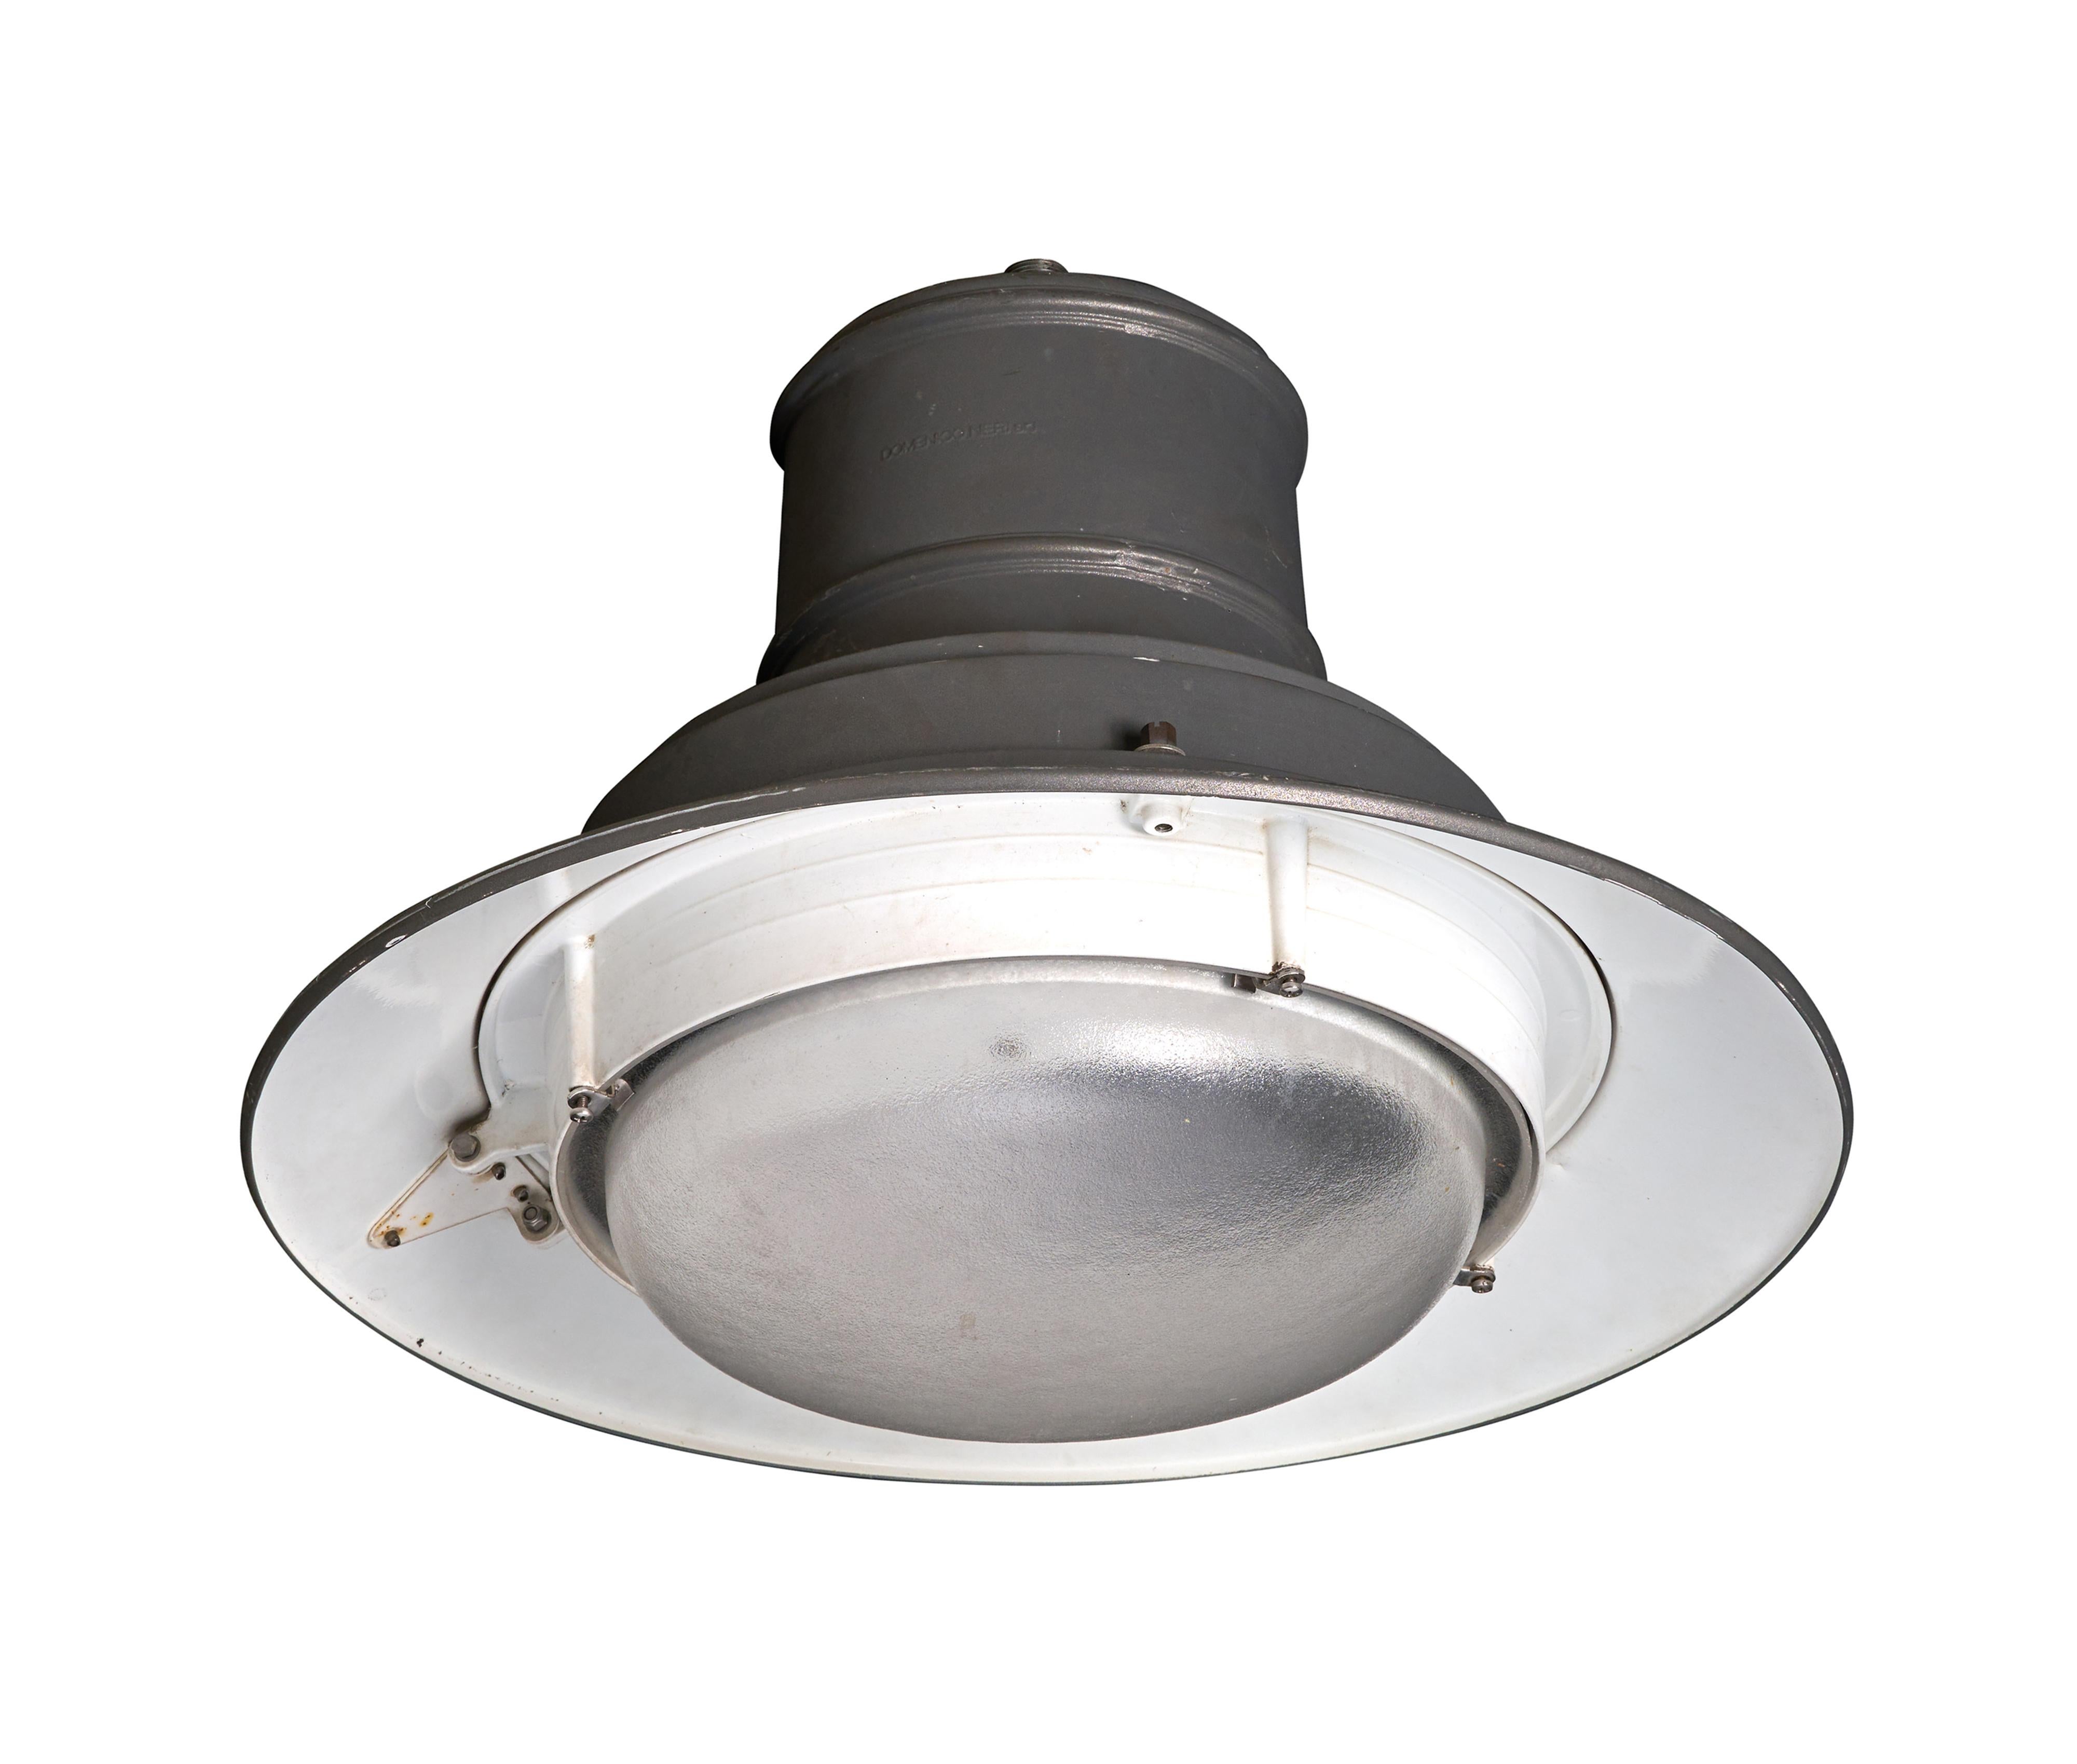 Italian industrial light fixture. Great condition. (multiples available)
